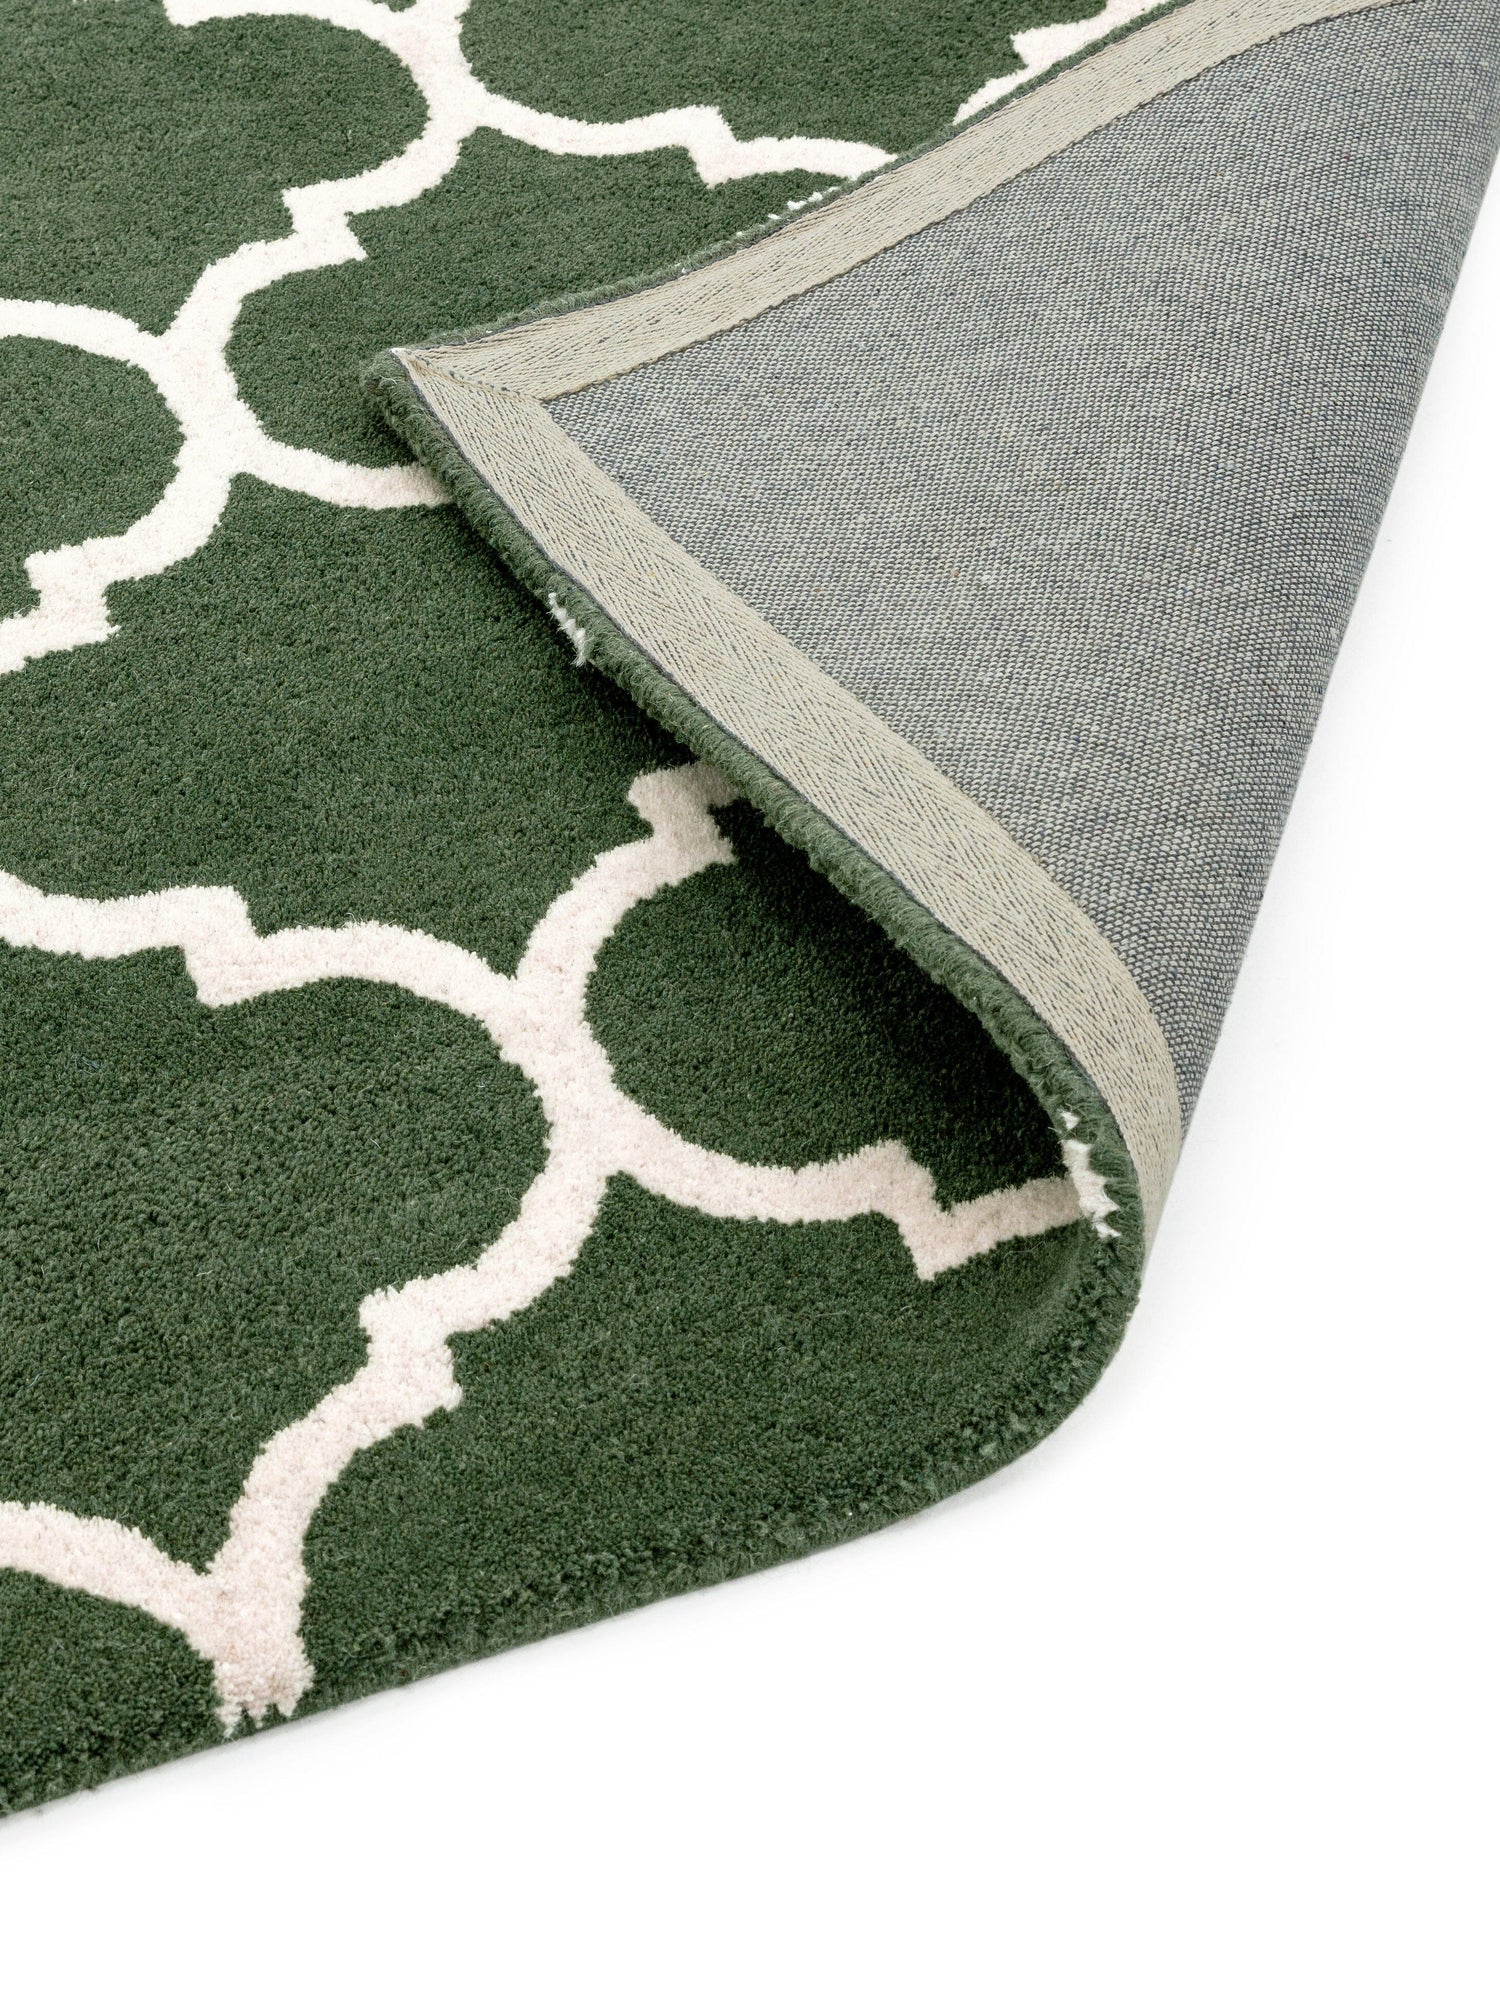  Asiatic Carpets-Asiatic Carpets Albany Handtufted Rug Ogee Green - 160 x 230cm-Green 477 